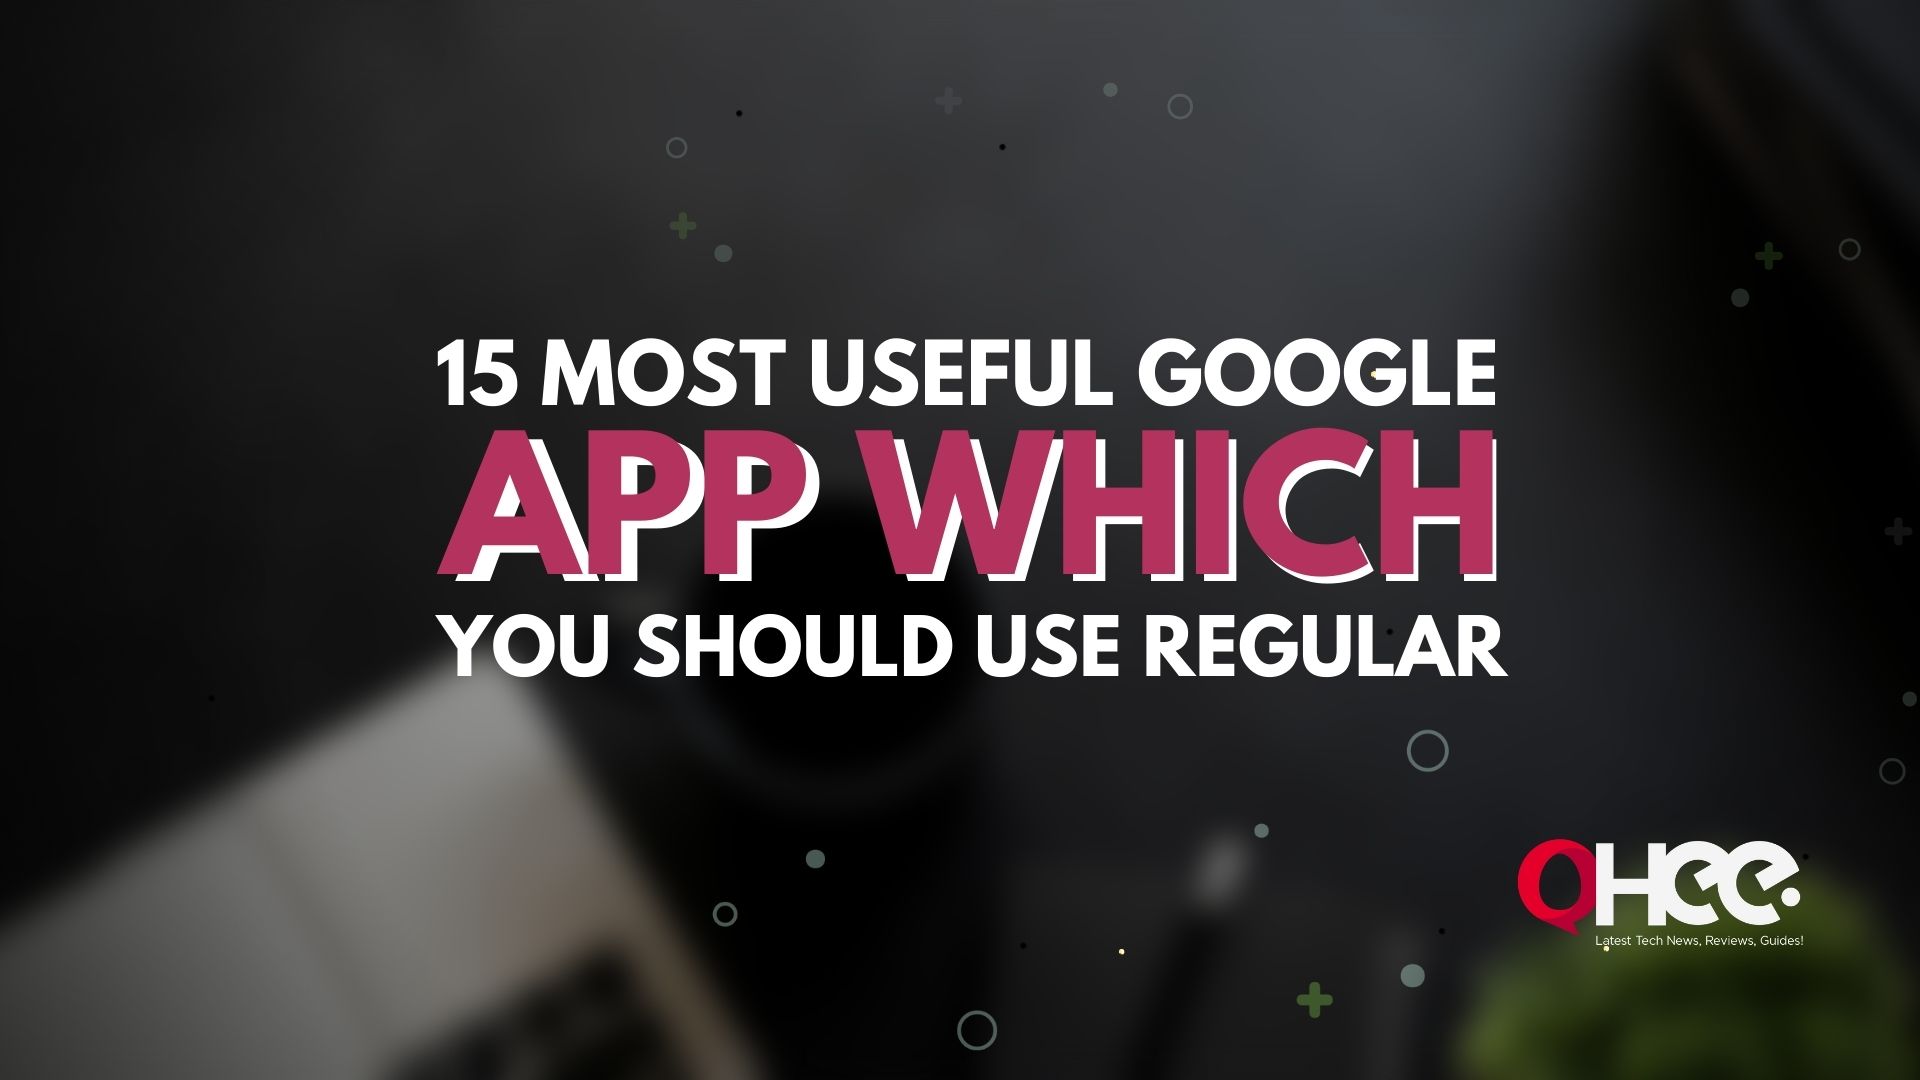 15 Most Useful Google Apps Which You Should Use Regular